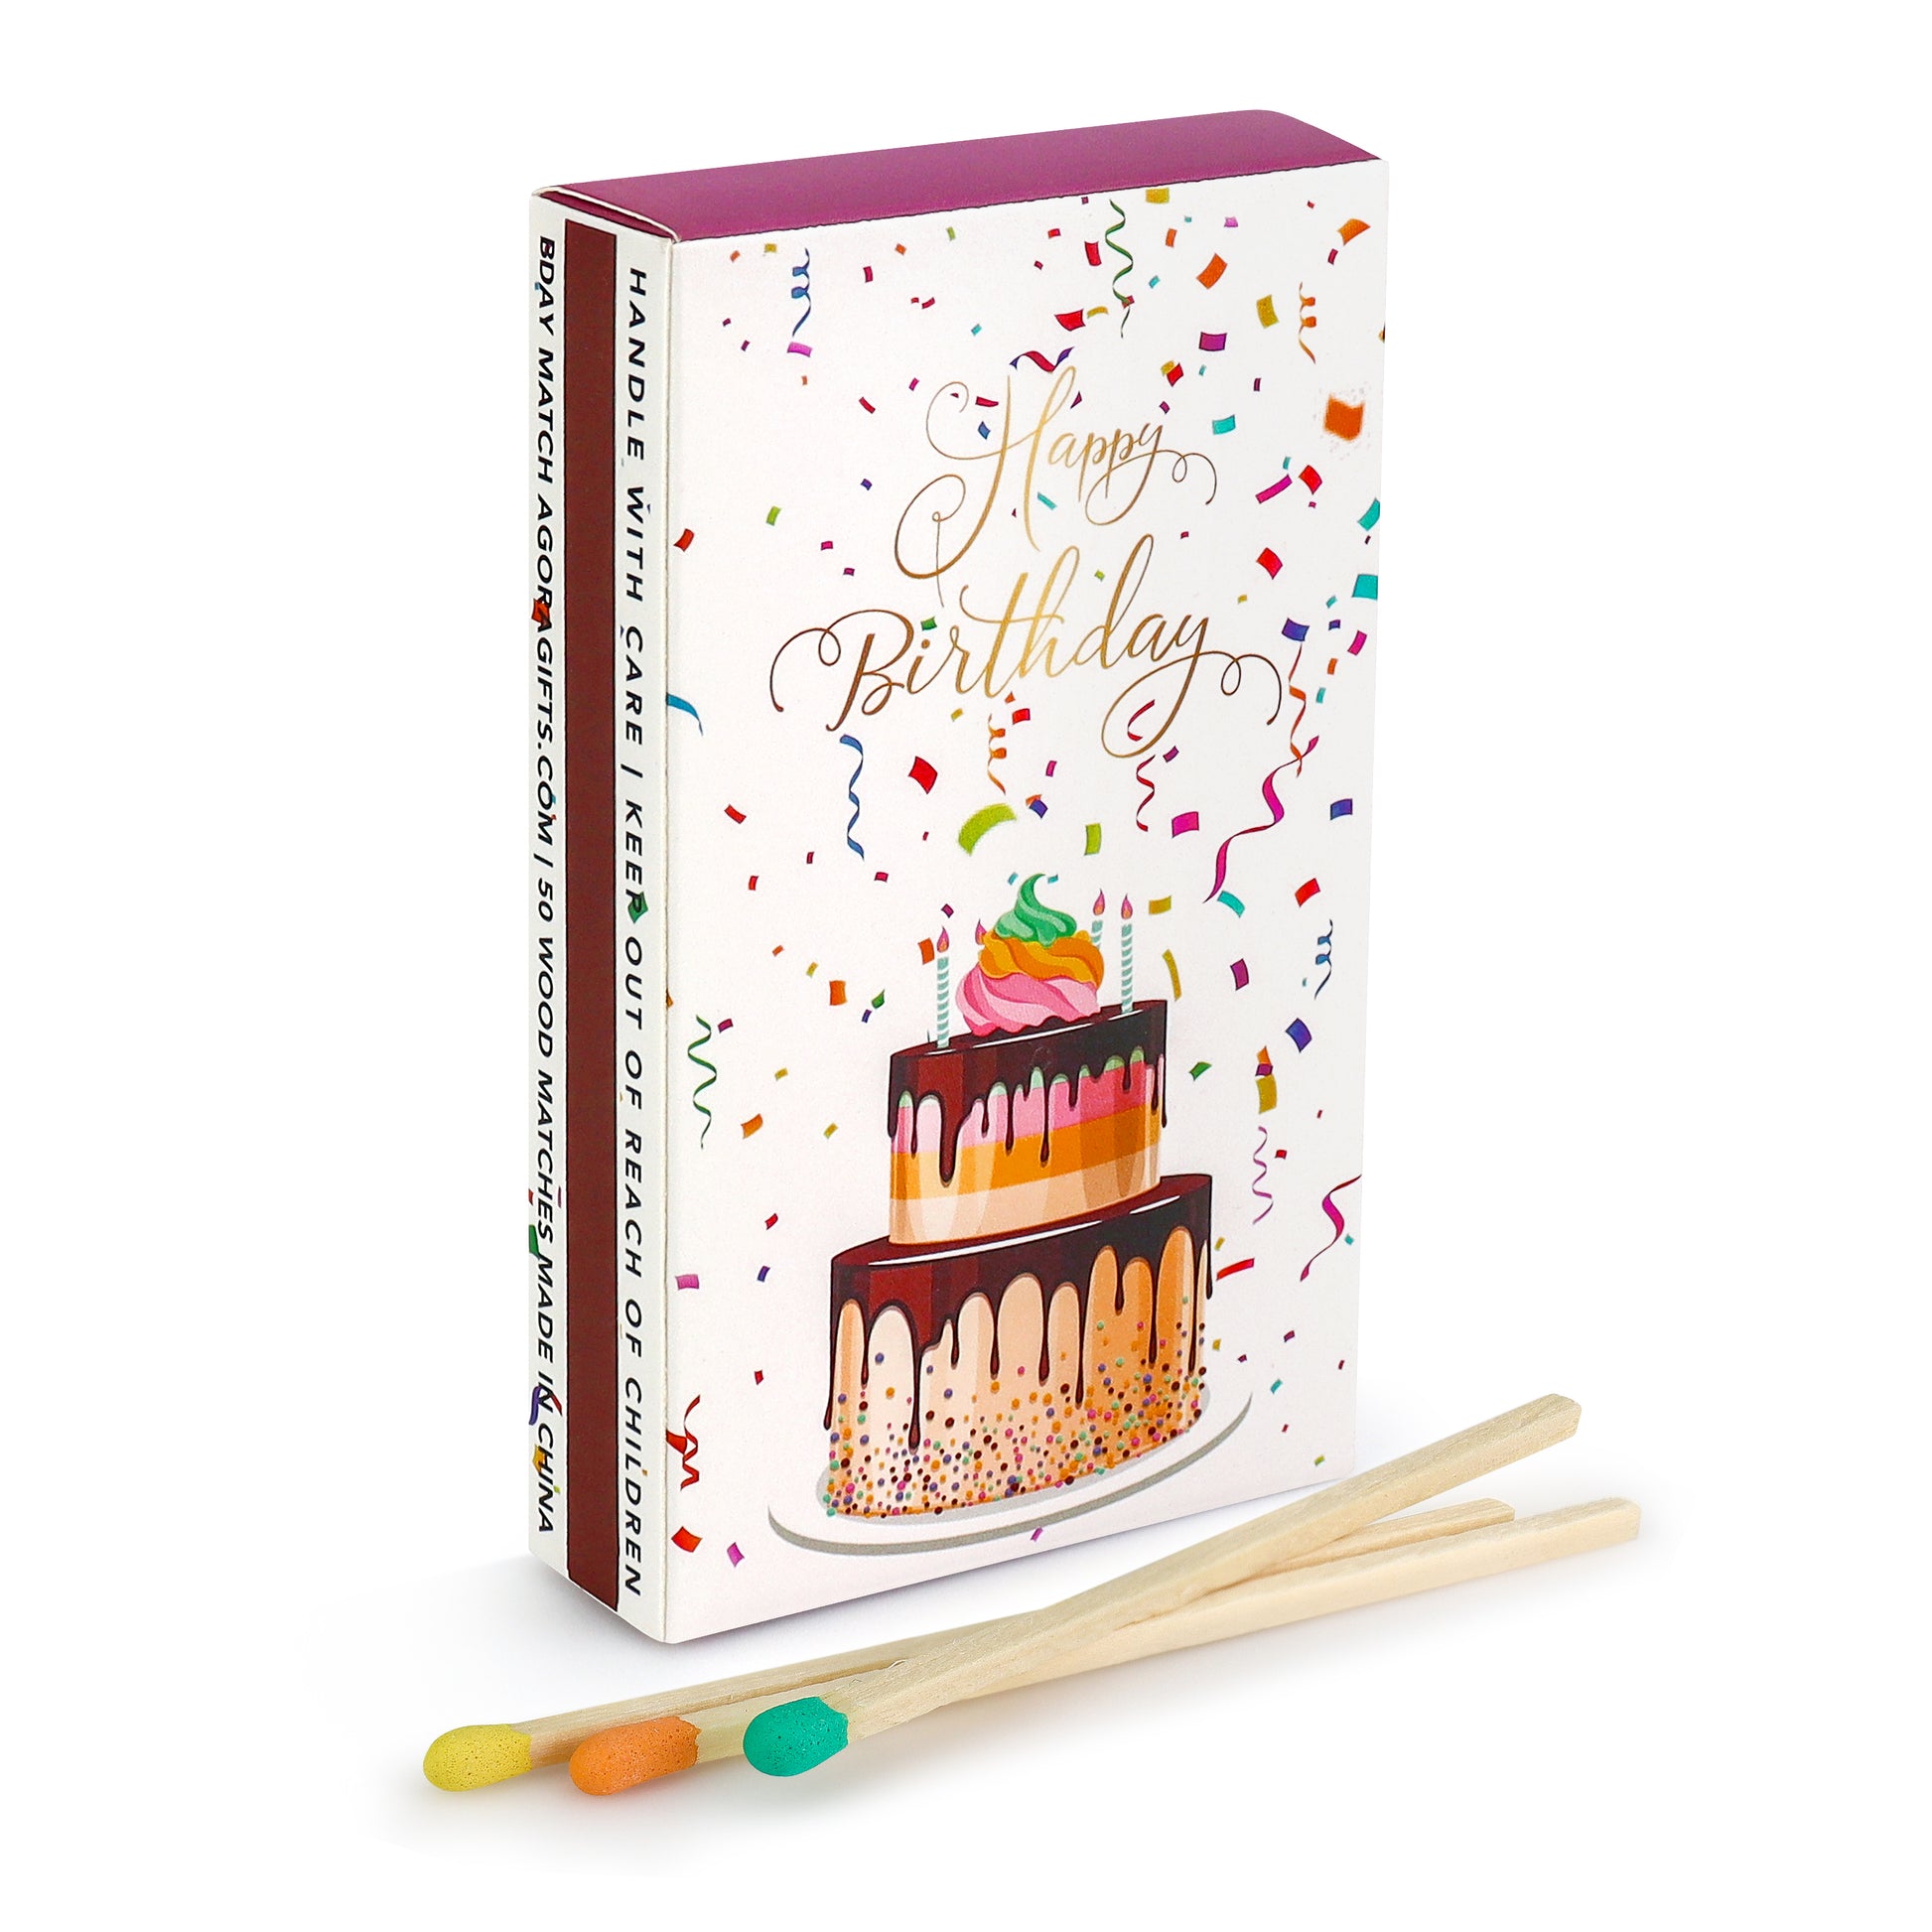 Happy Birthday Matches Box - 4-Inch Long Matches for Candles with Stri